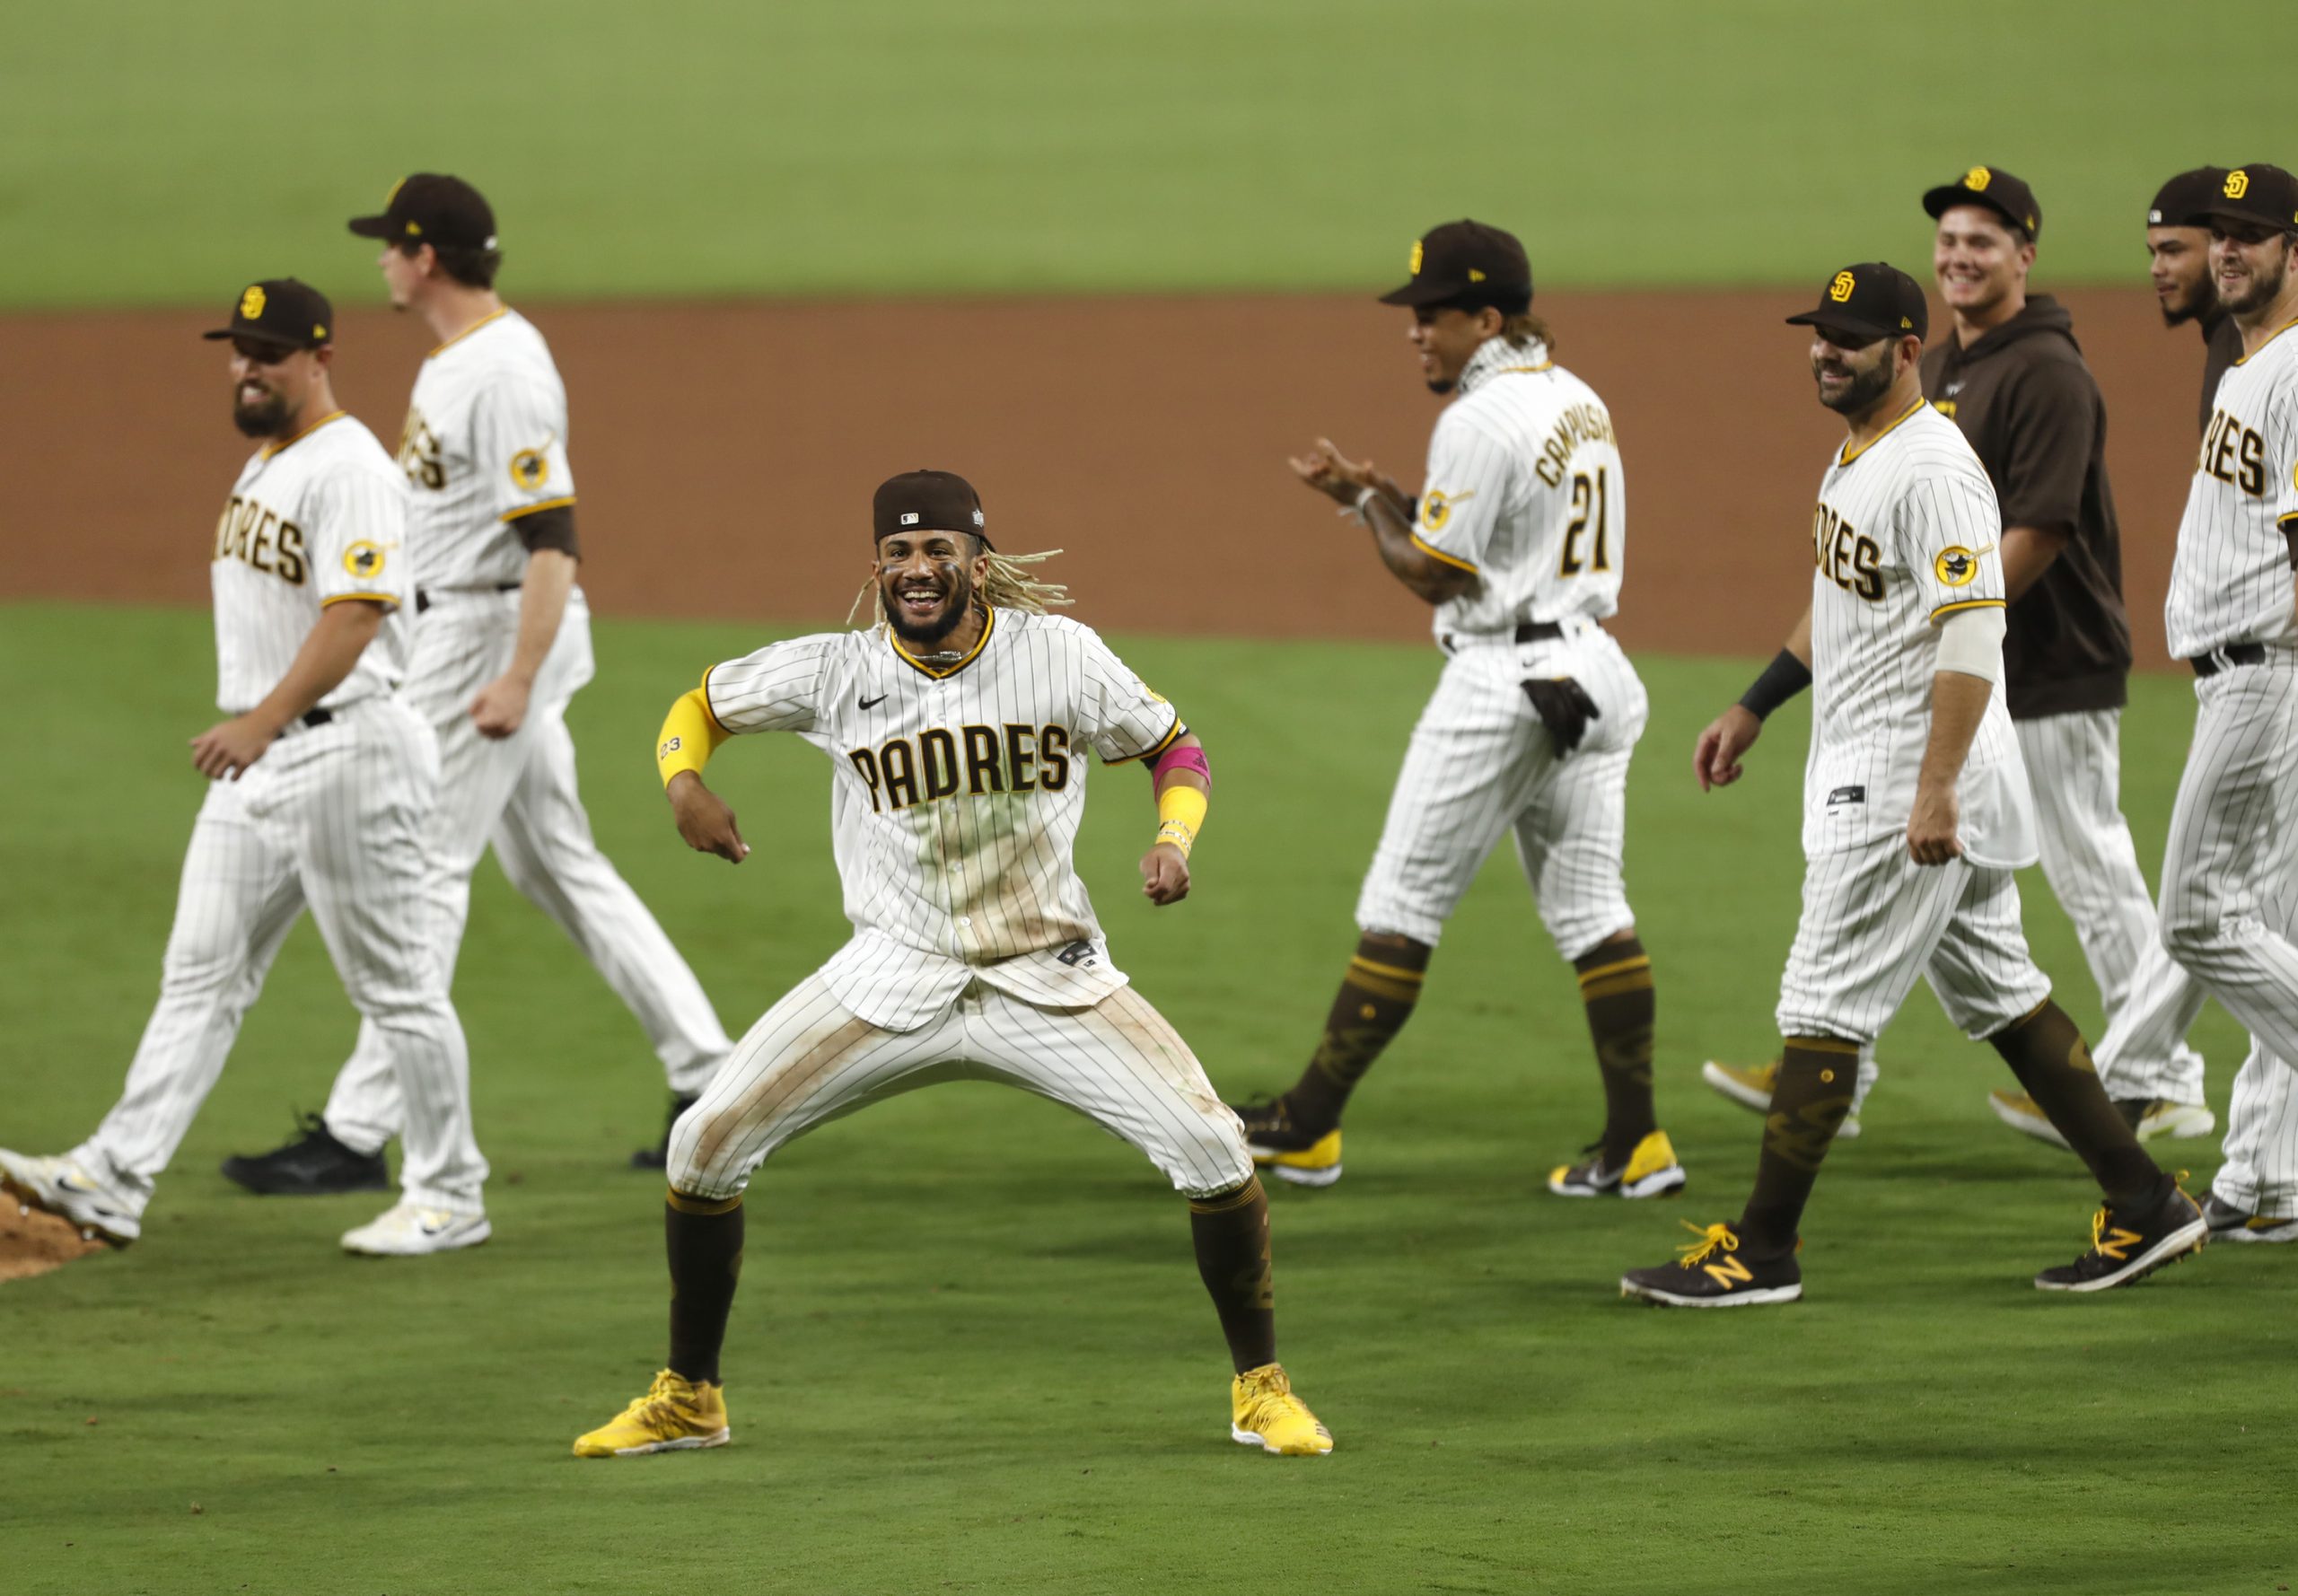 San Diego Padres infielder Fernando Tatis Jr., middle, celebrates after a series-clinching 4-0 win against the St. Louis Cardinals in Game 3 of the National League Wild Card series at Petco Park in San Diego on Friday, Oct. 2, 2020. (K.C. Alfred/San Diego Union-Tribune/TNS)